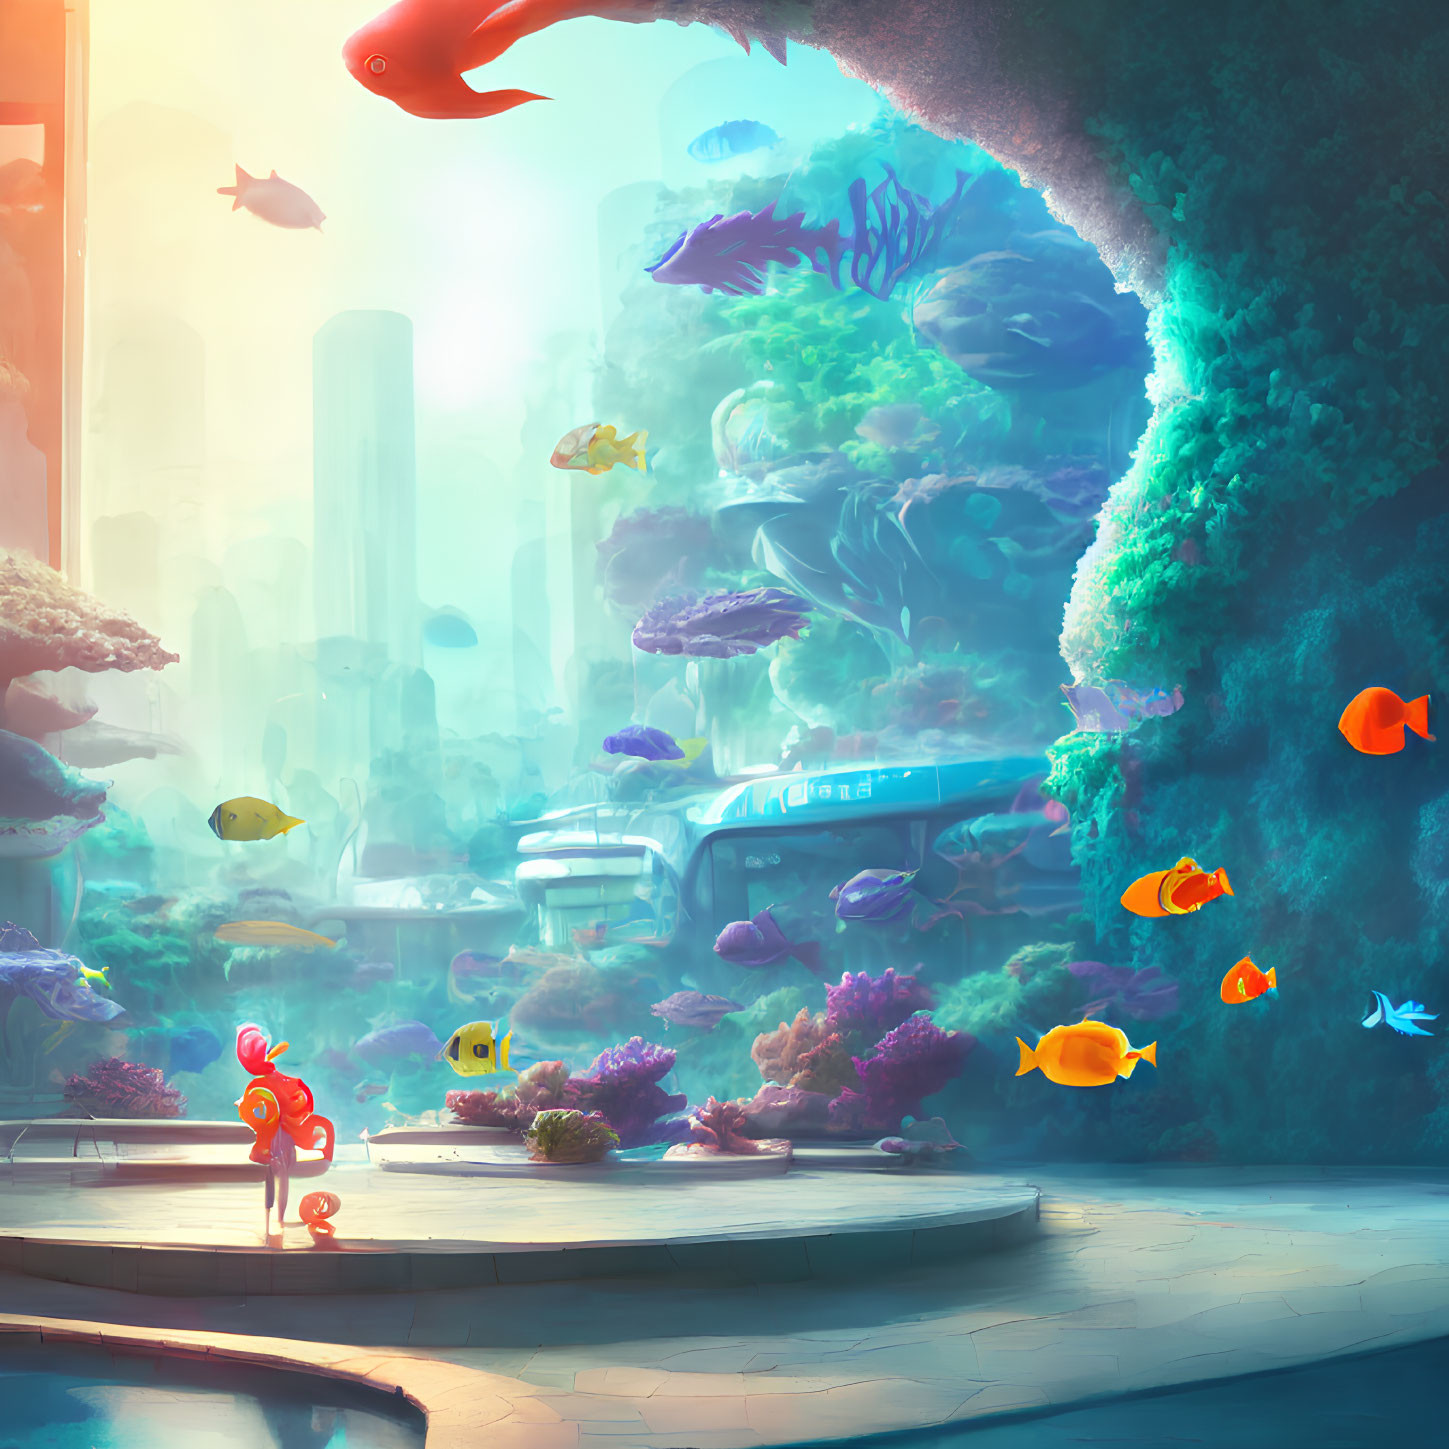 Colorful underwater scene with fish, corals, train, and fish-like character